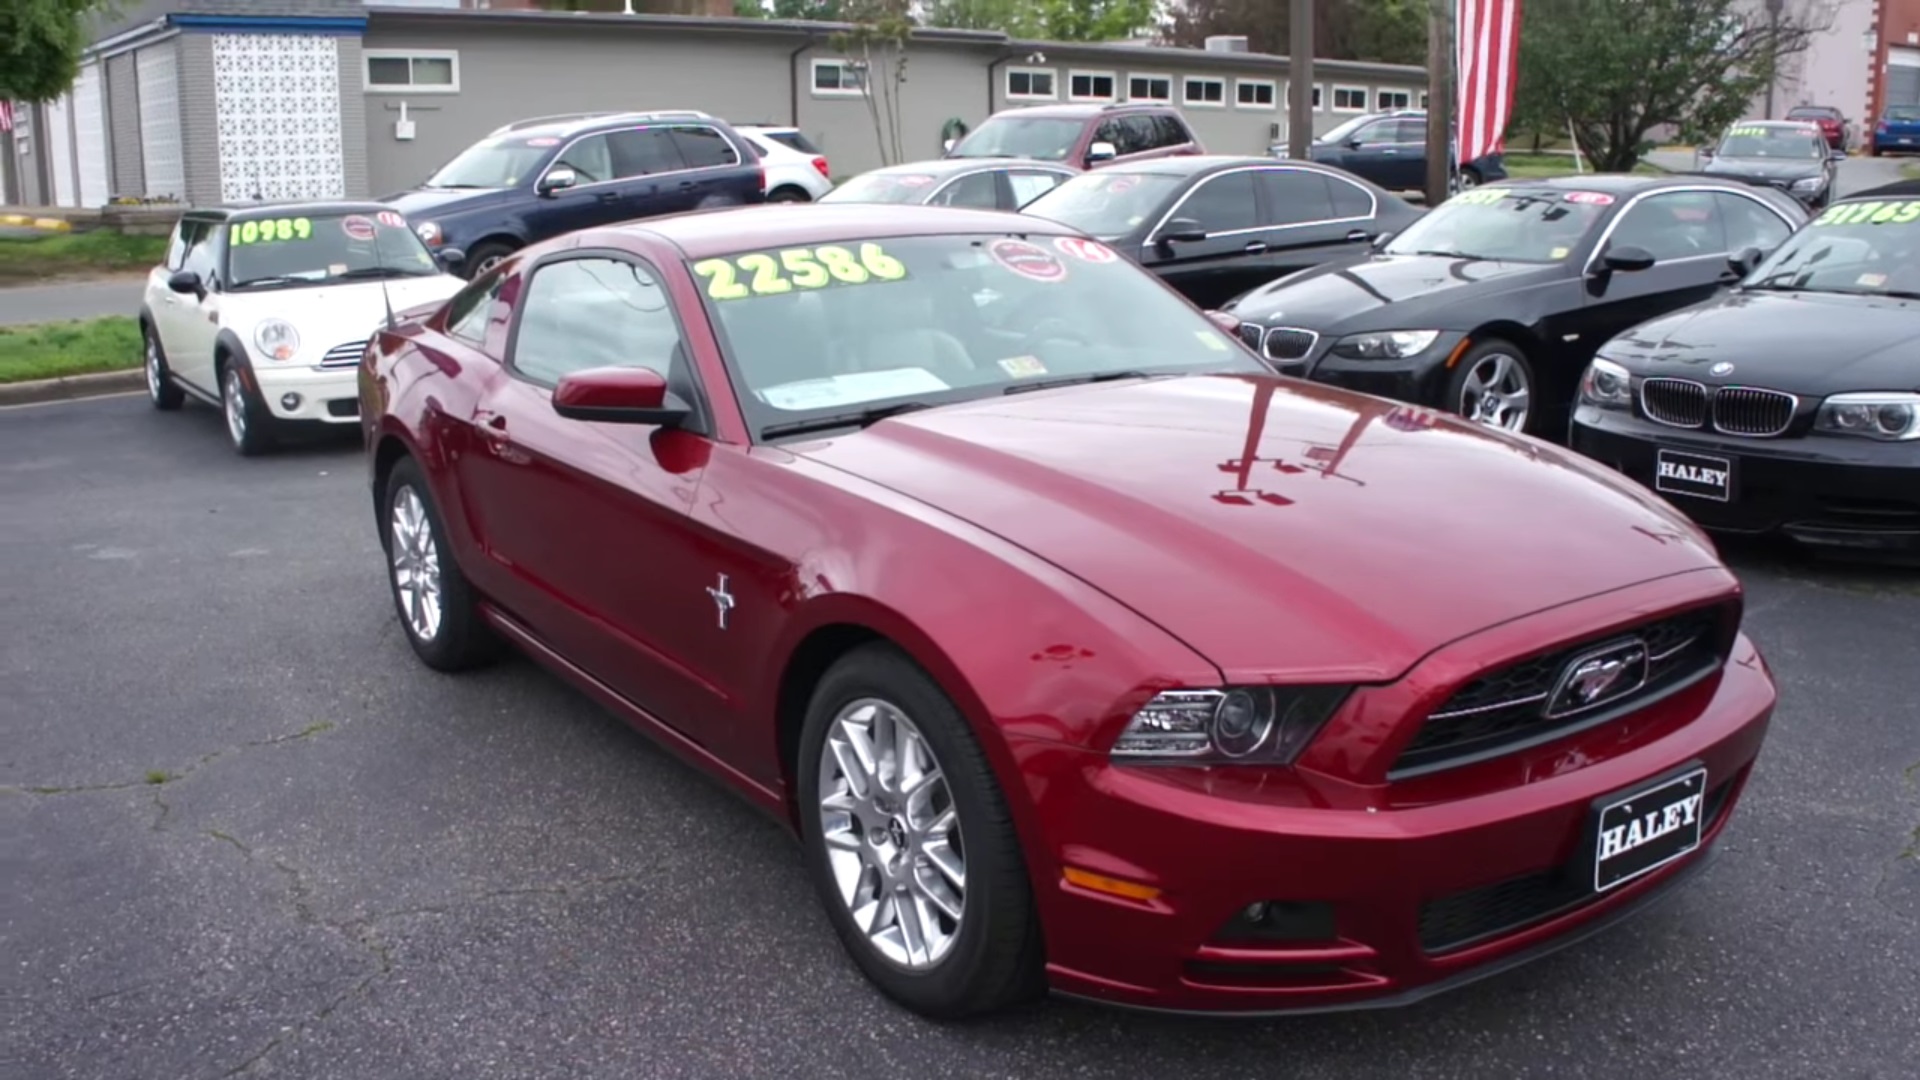 Video: 2014 Ford Mustang V6 Premium Walkaround, Start up, Tour & Overview